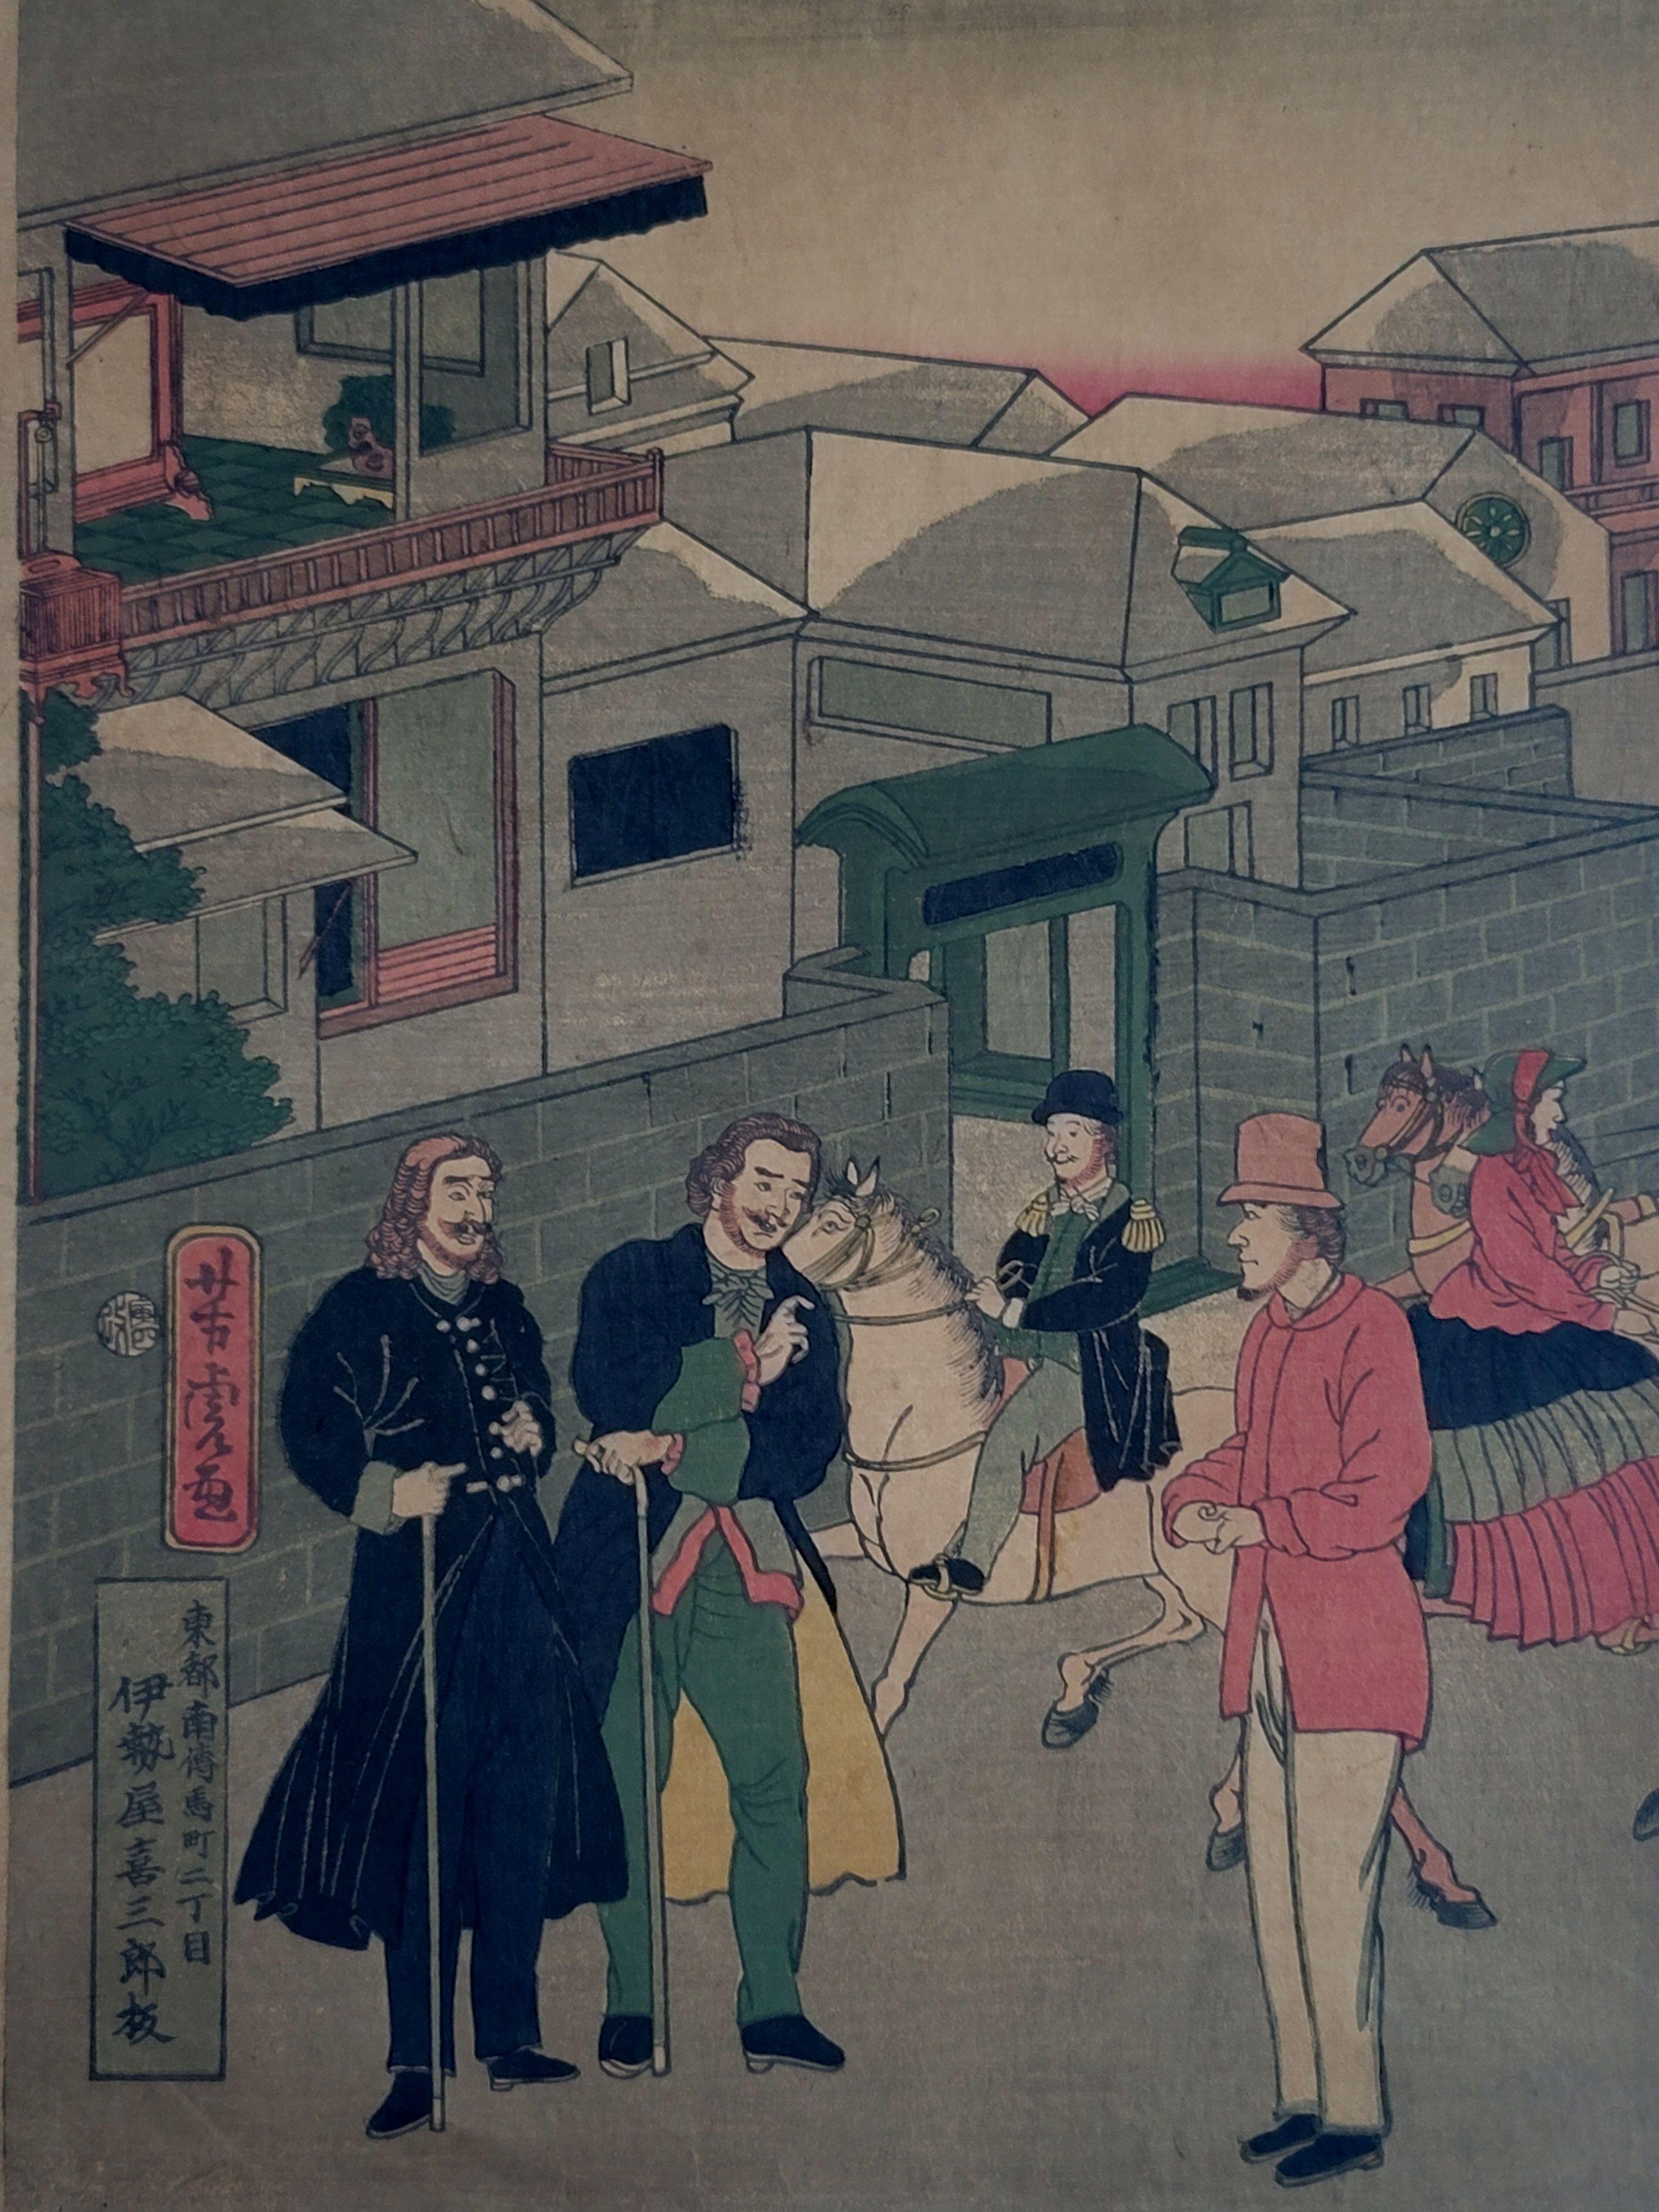 Utagawa Yoshitora, ????? ( ????) was a designer of ukiyo-e Japanese woodblock prints and an illustrator of books and newspapers who was active from about 1850 to about 1880. He was born in Edo, but neither his date of birth nor date of death is